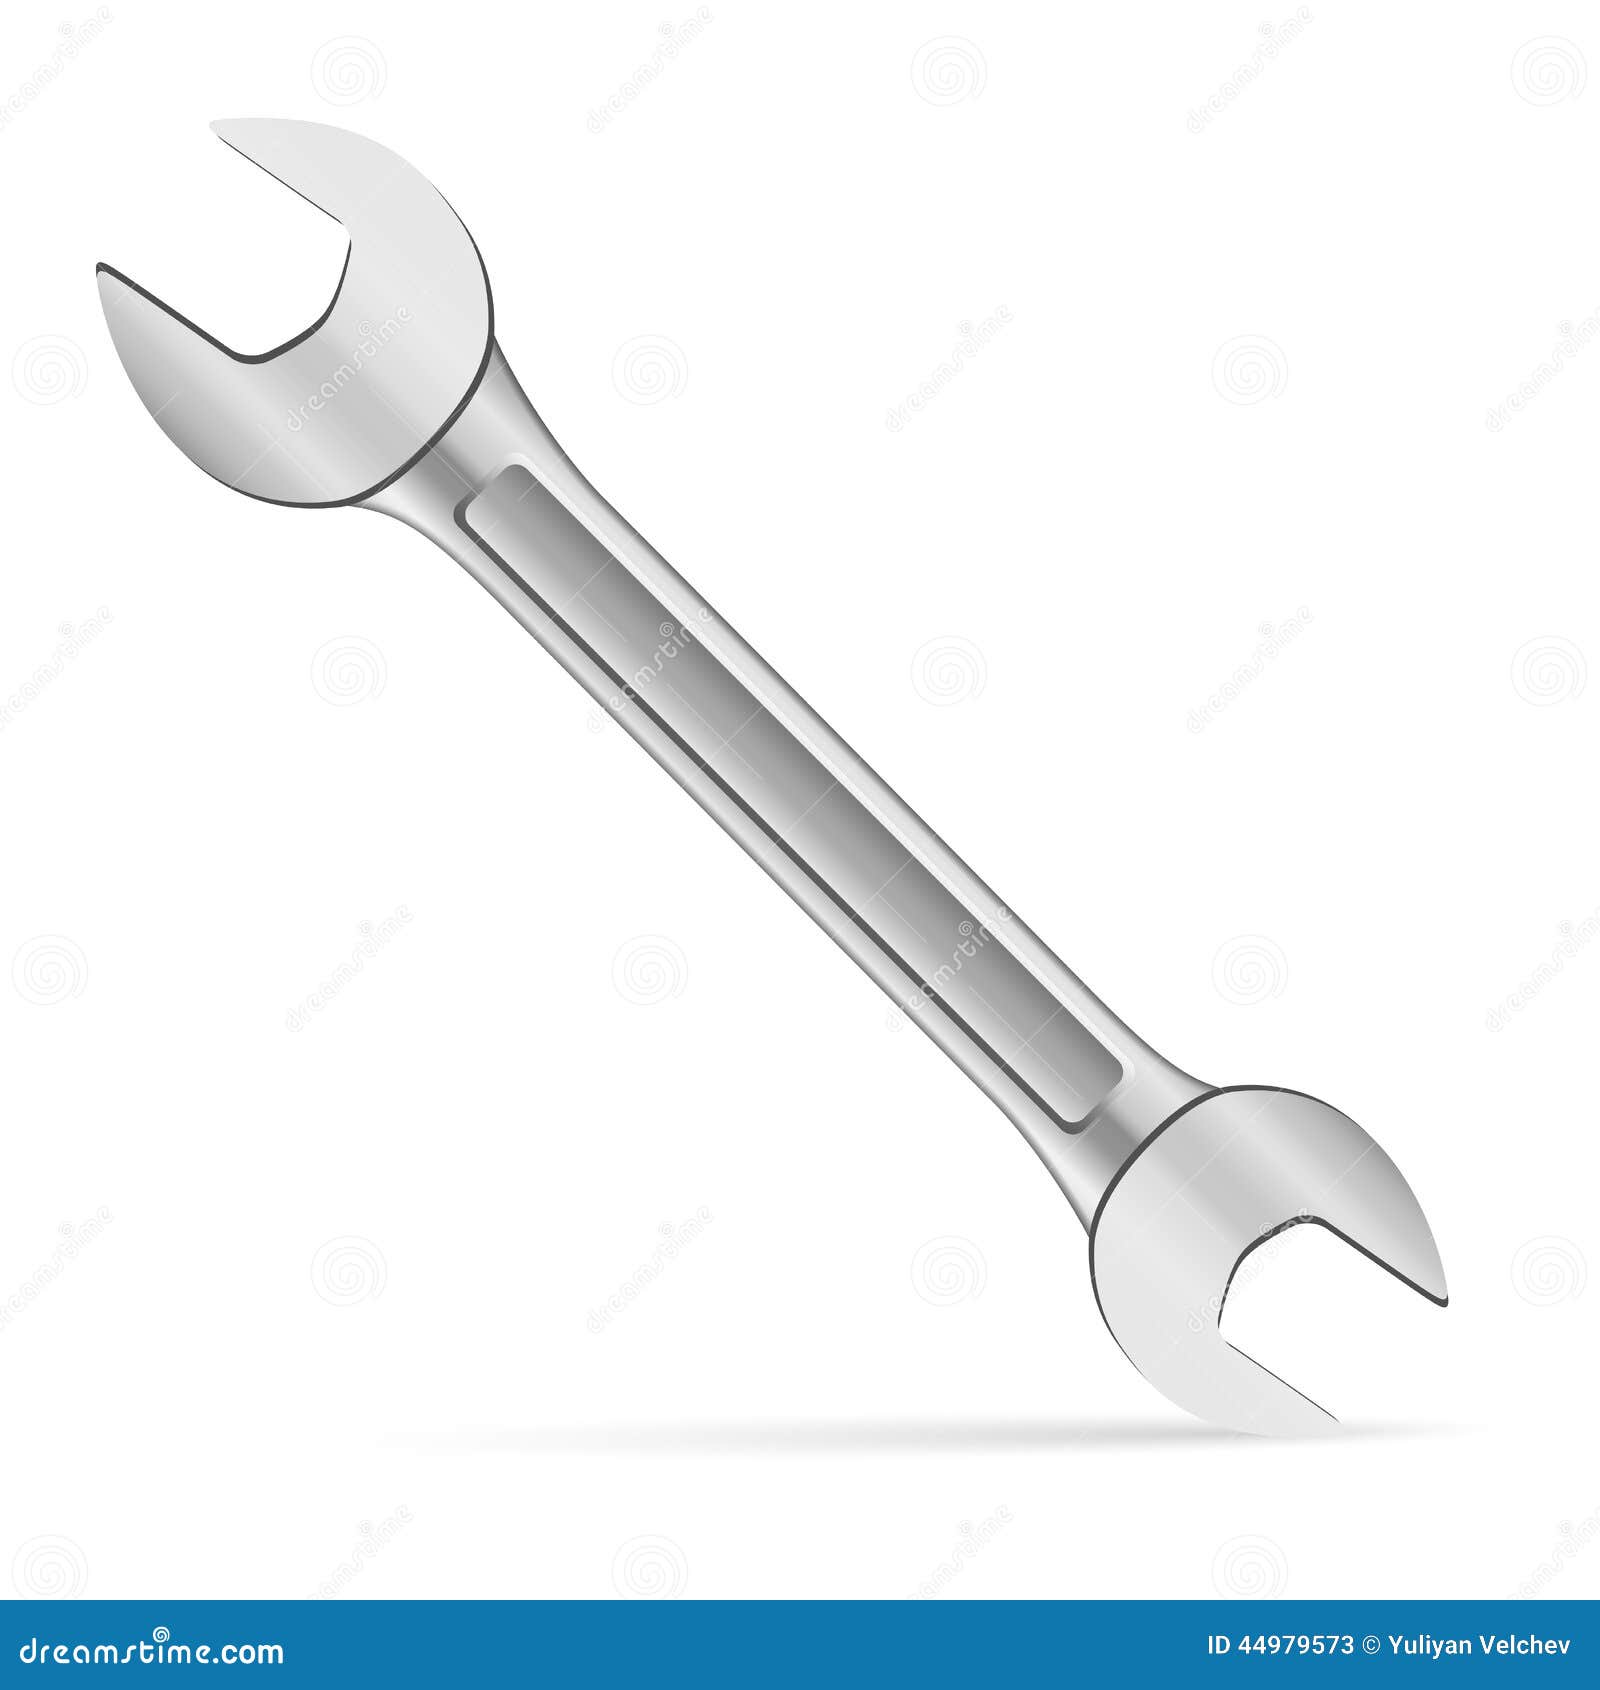 Wrench stock vector. Illustration of industry, workshop - 44979573